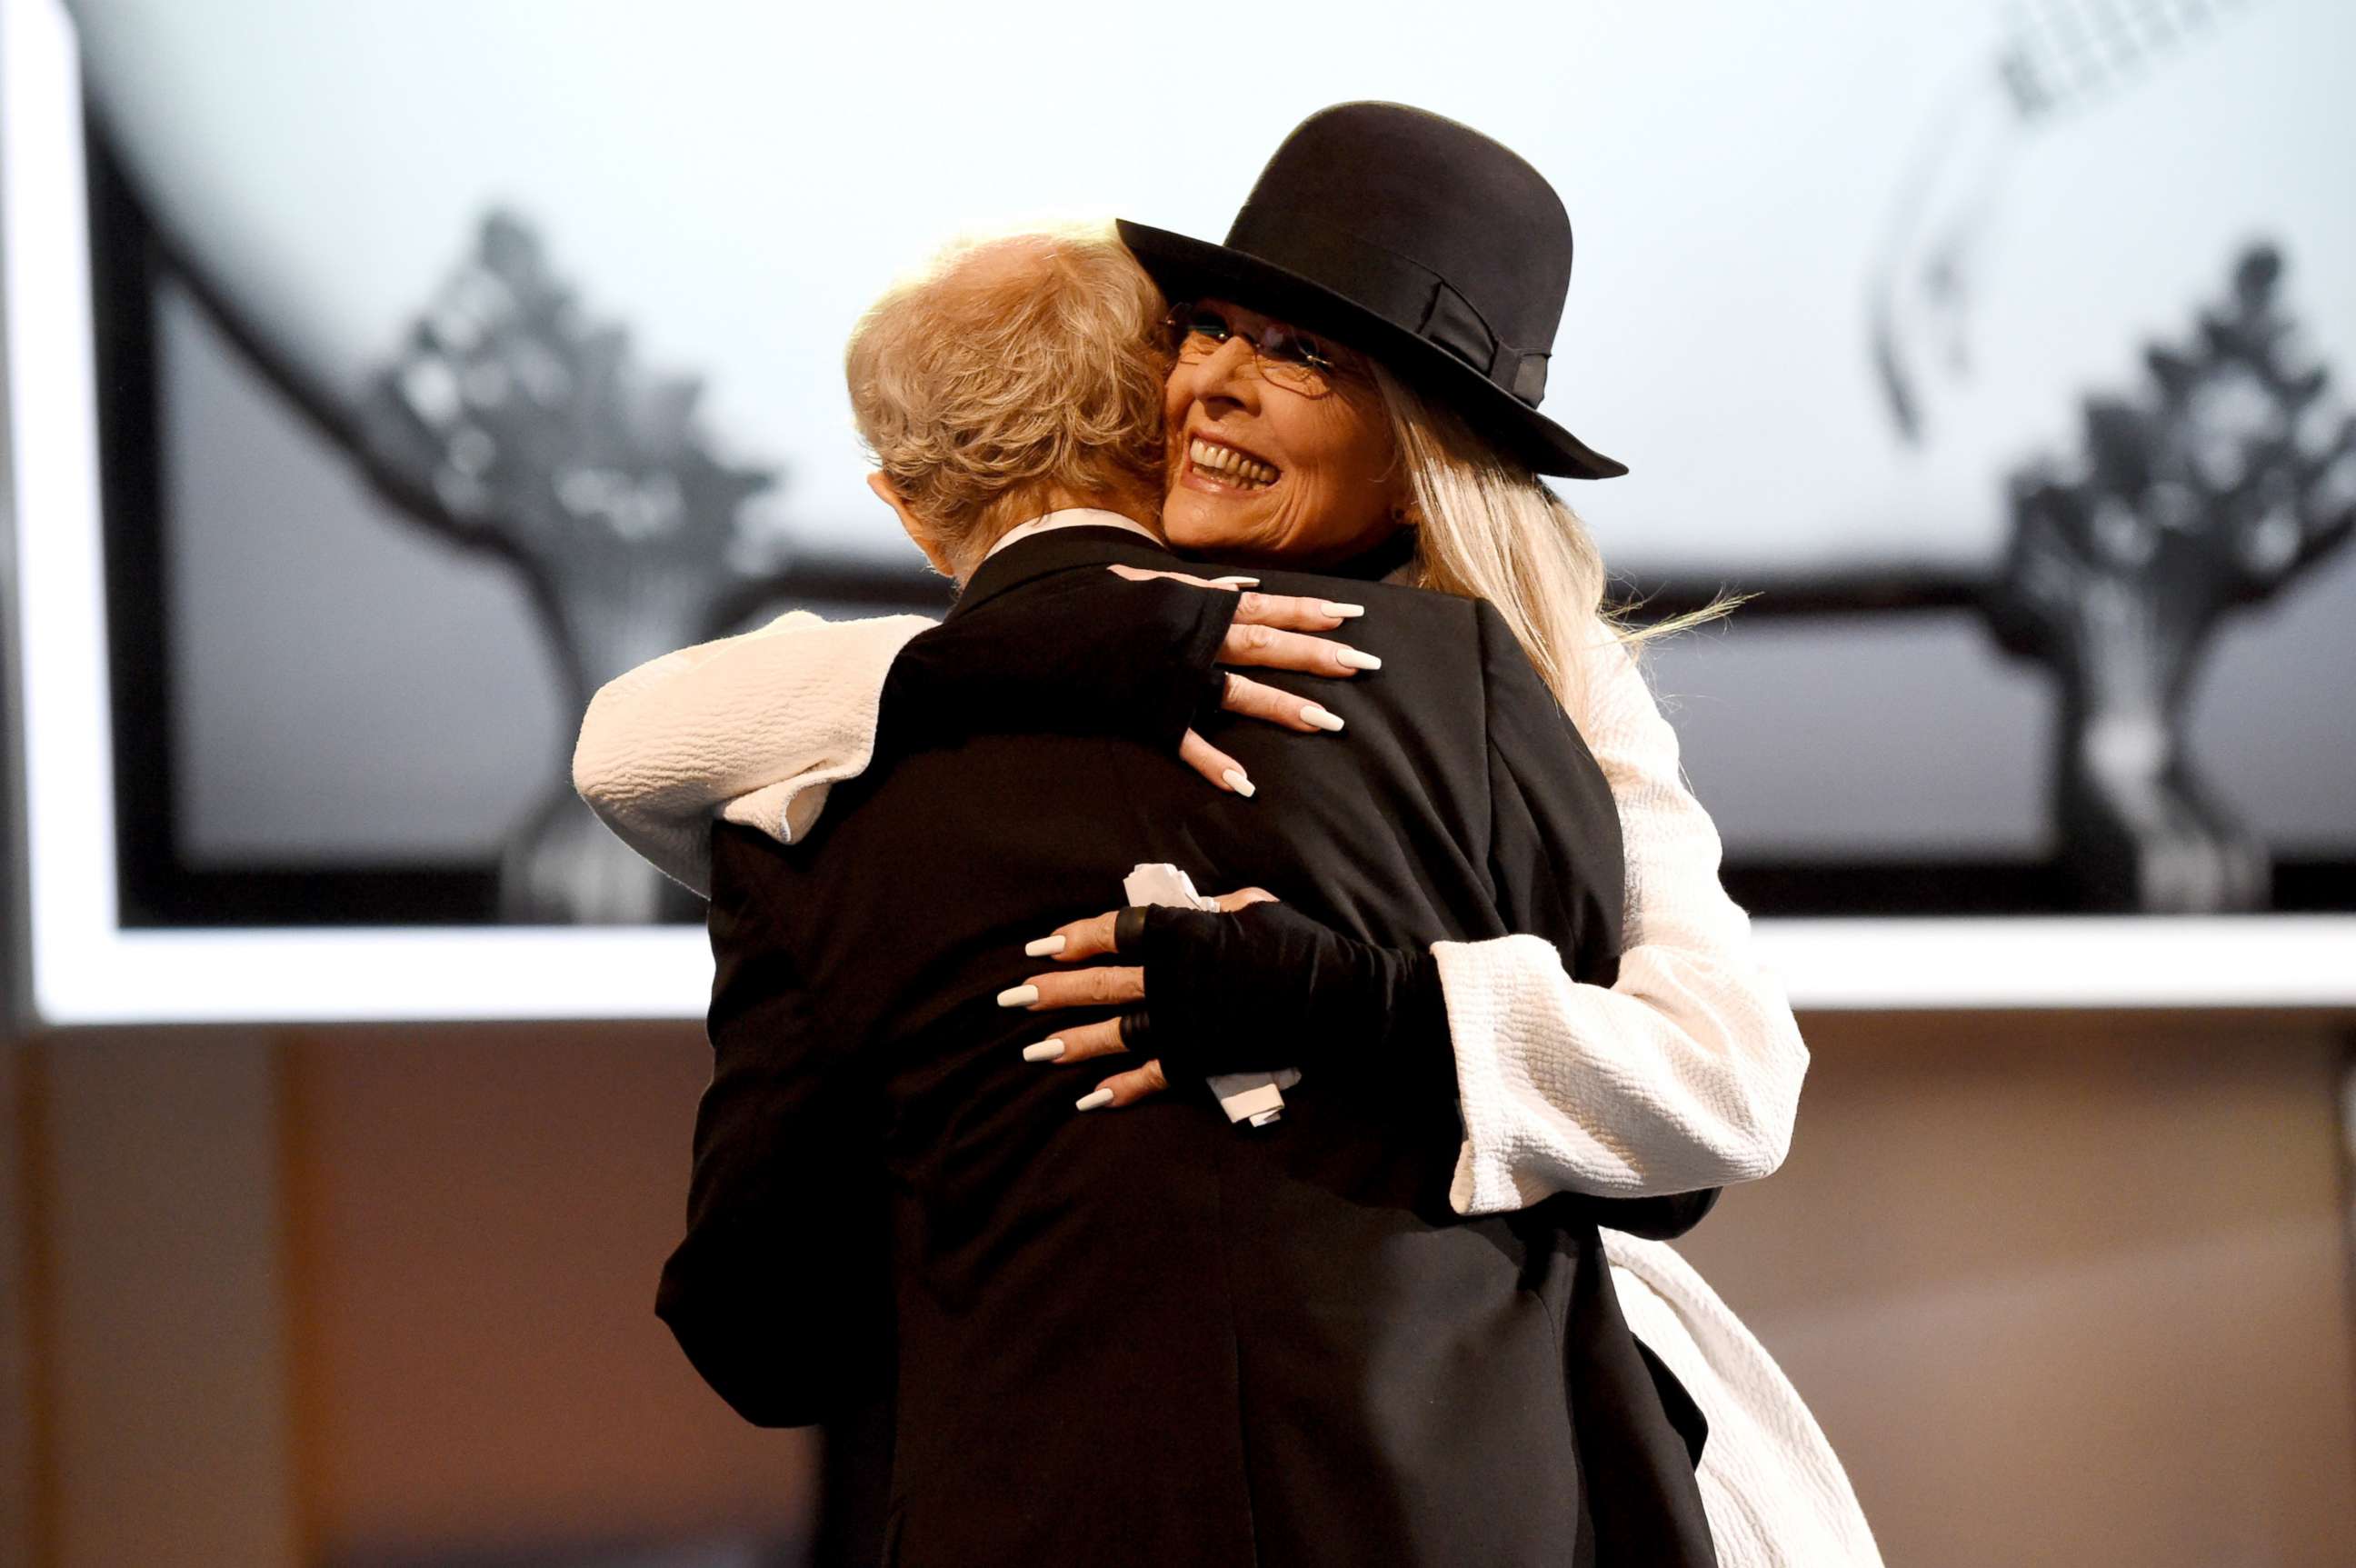 PHOTO: Director-Actor Woody Allen and Honoree Diane Keaton onstage at American Film Institute's 45th Life Achievement Award Gala Tribute to Diane Keaton at Dolby Theatre, June 8, 2017, in Hollywood, Calif.